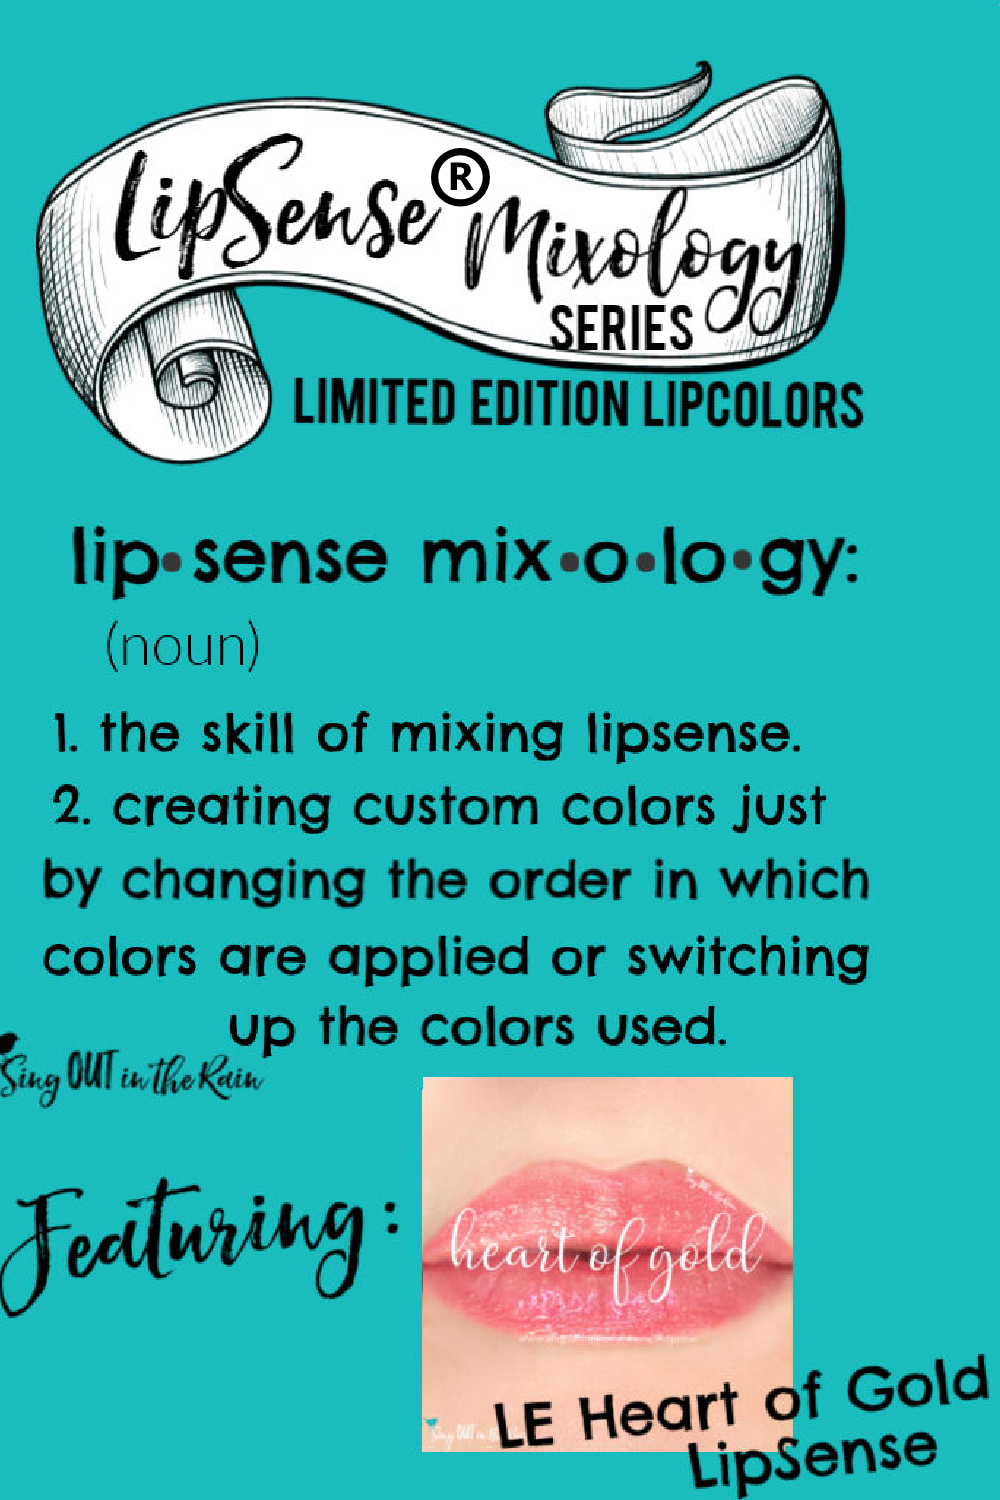 The Ultimate Guide to Heart of Gold LipSense Mixology